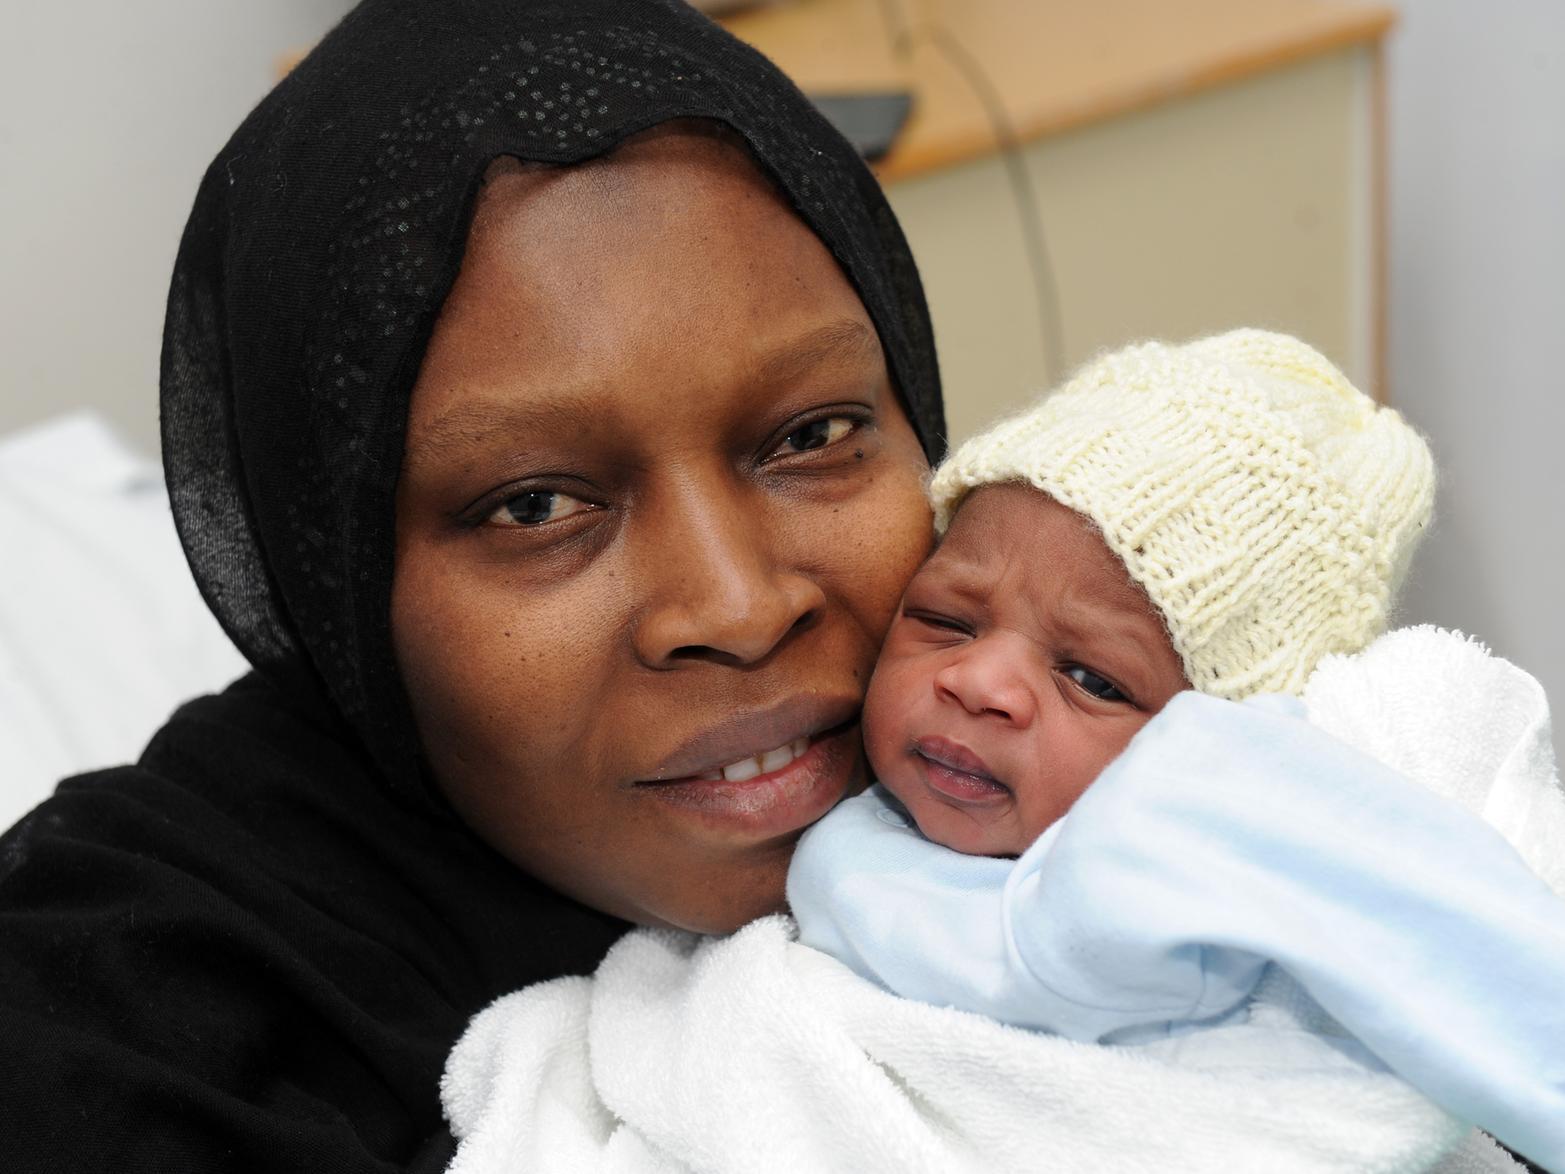 Fatoumata Drammeh with baby Essa born New Year's Day at Leeds General Infirmary.